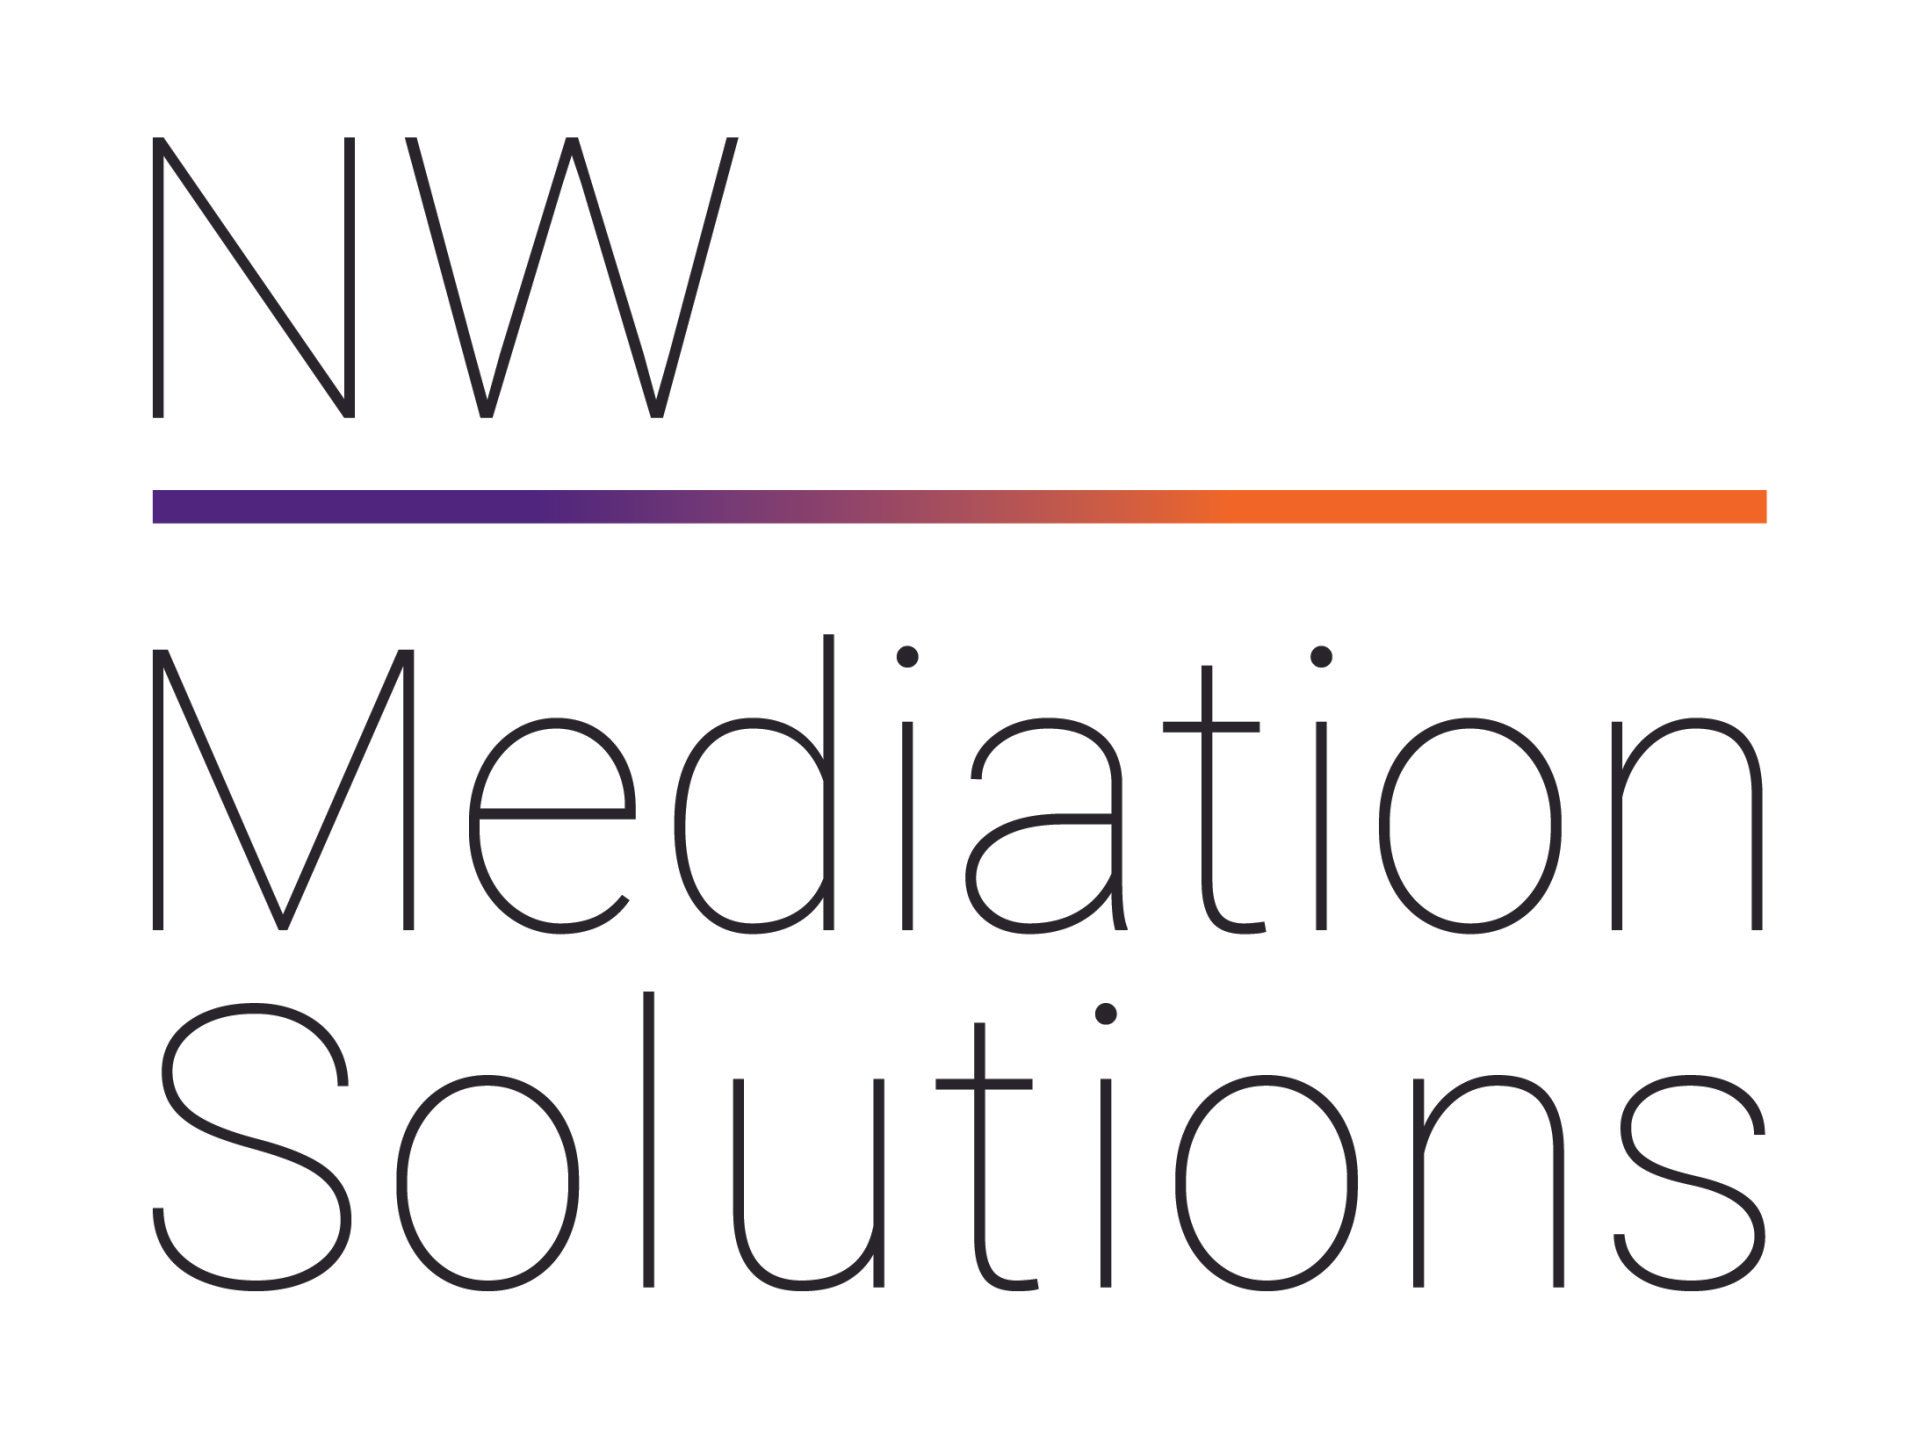 how to write a position statement for mediation